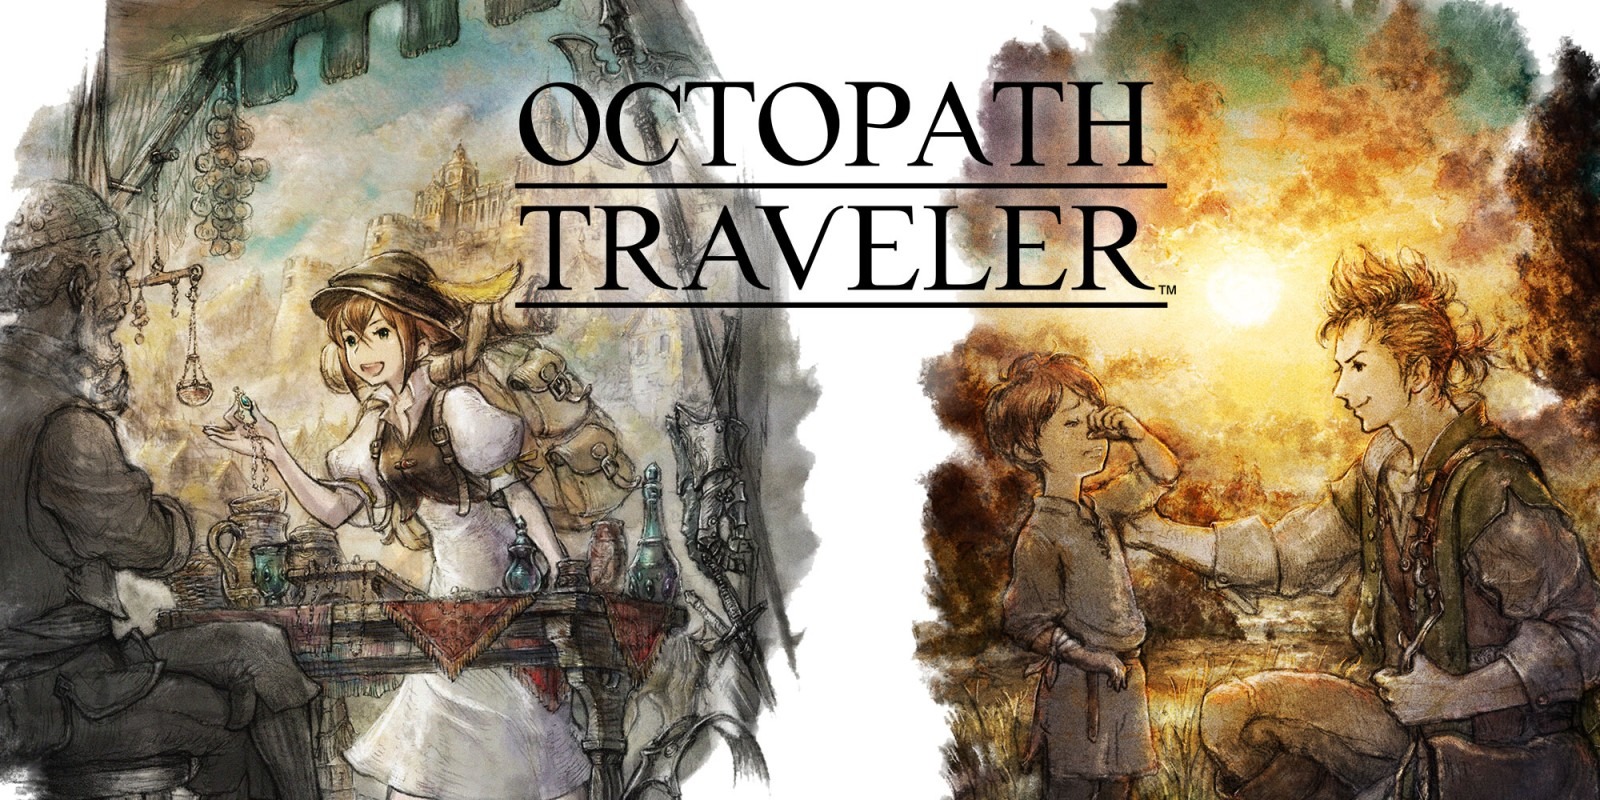 Octopath Traveler releasedate and special edition